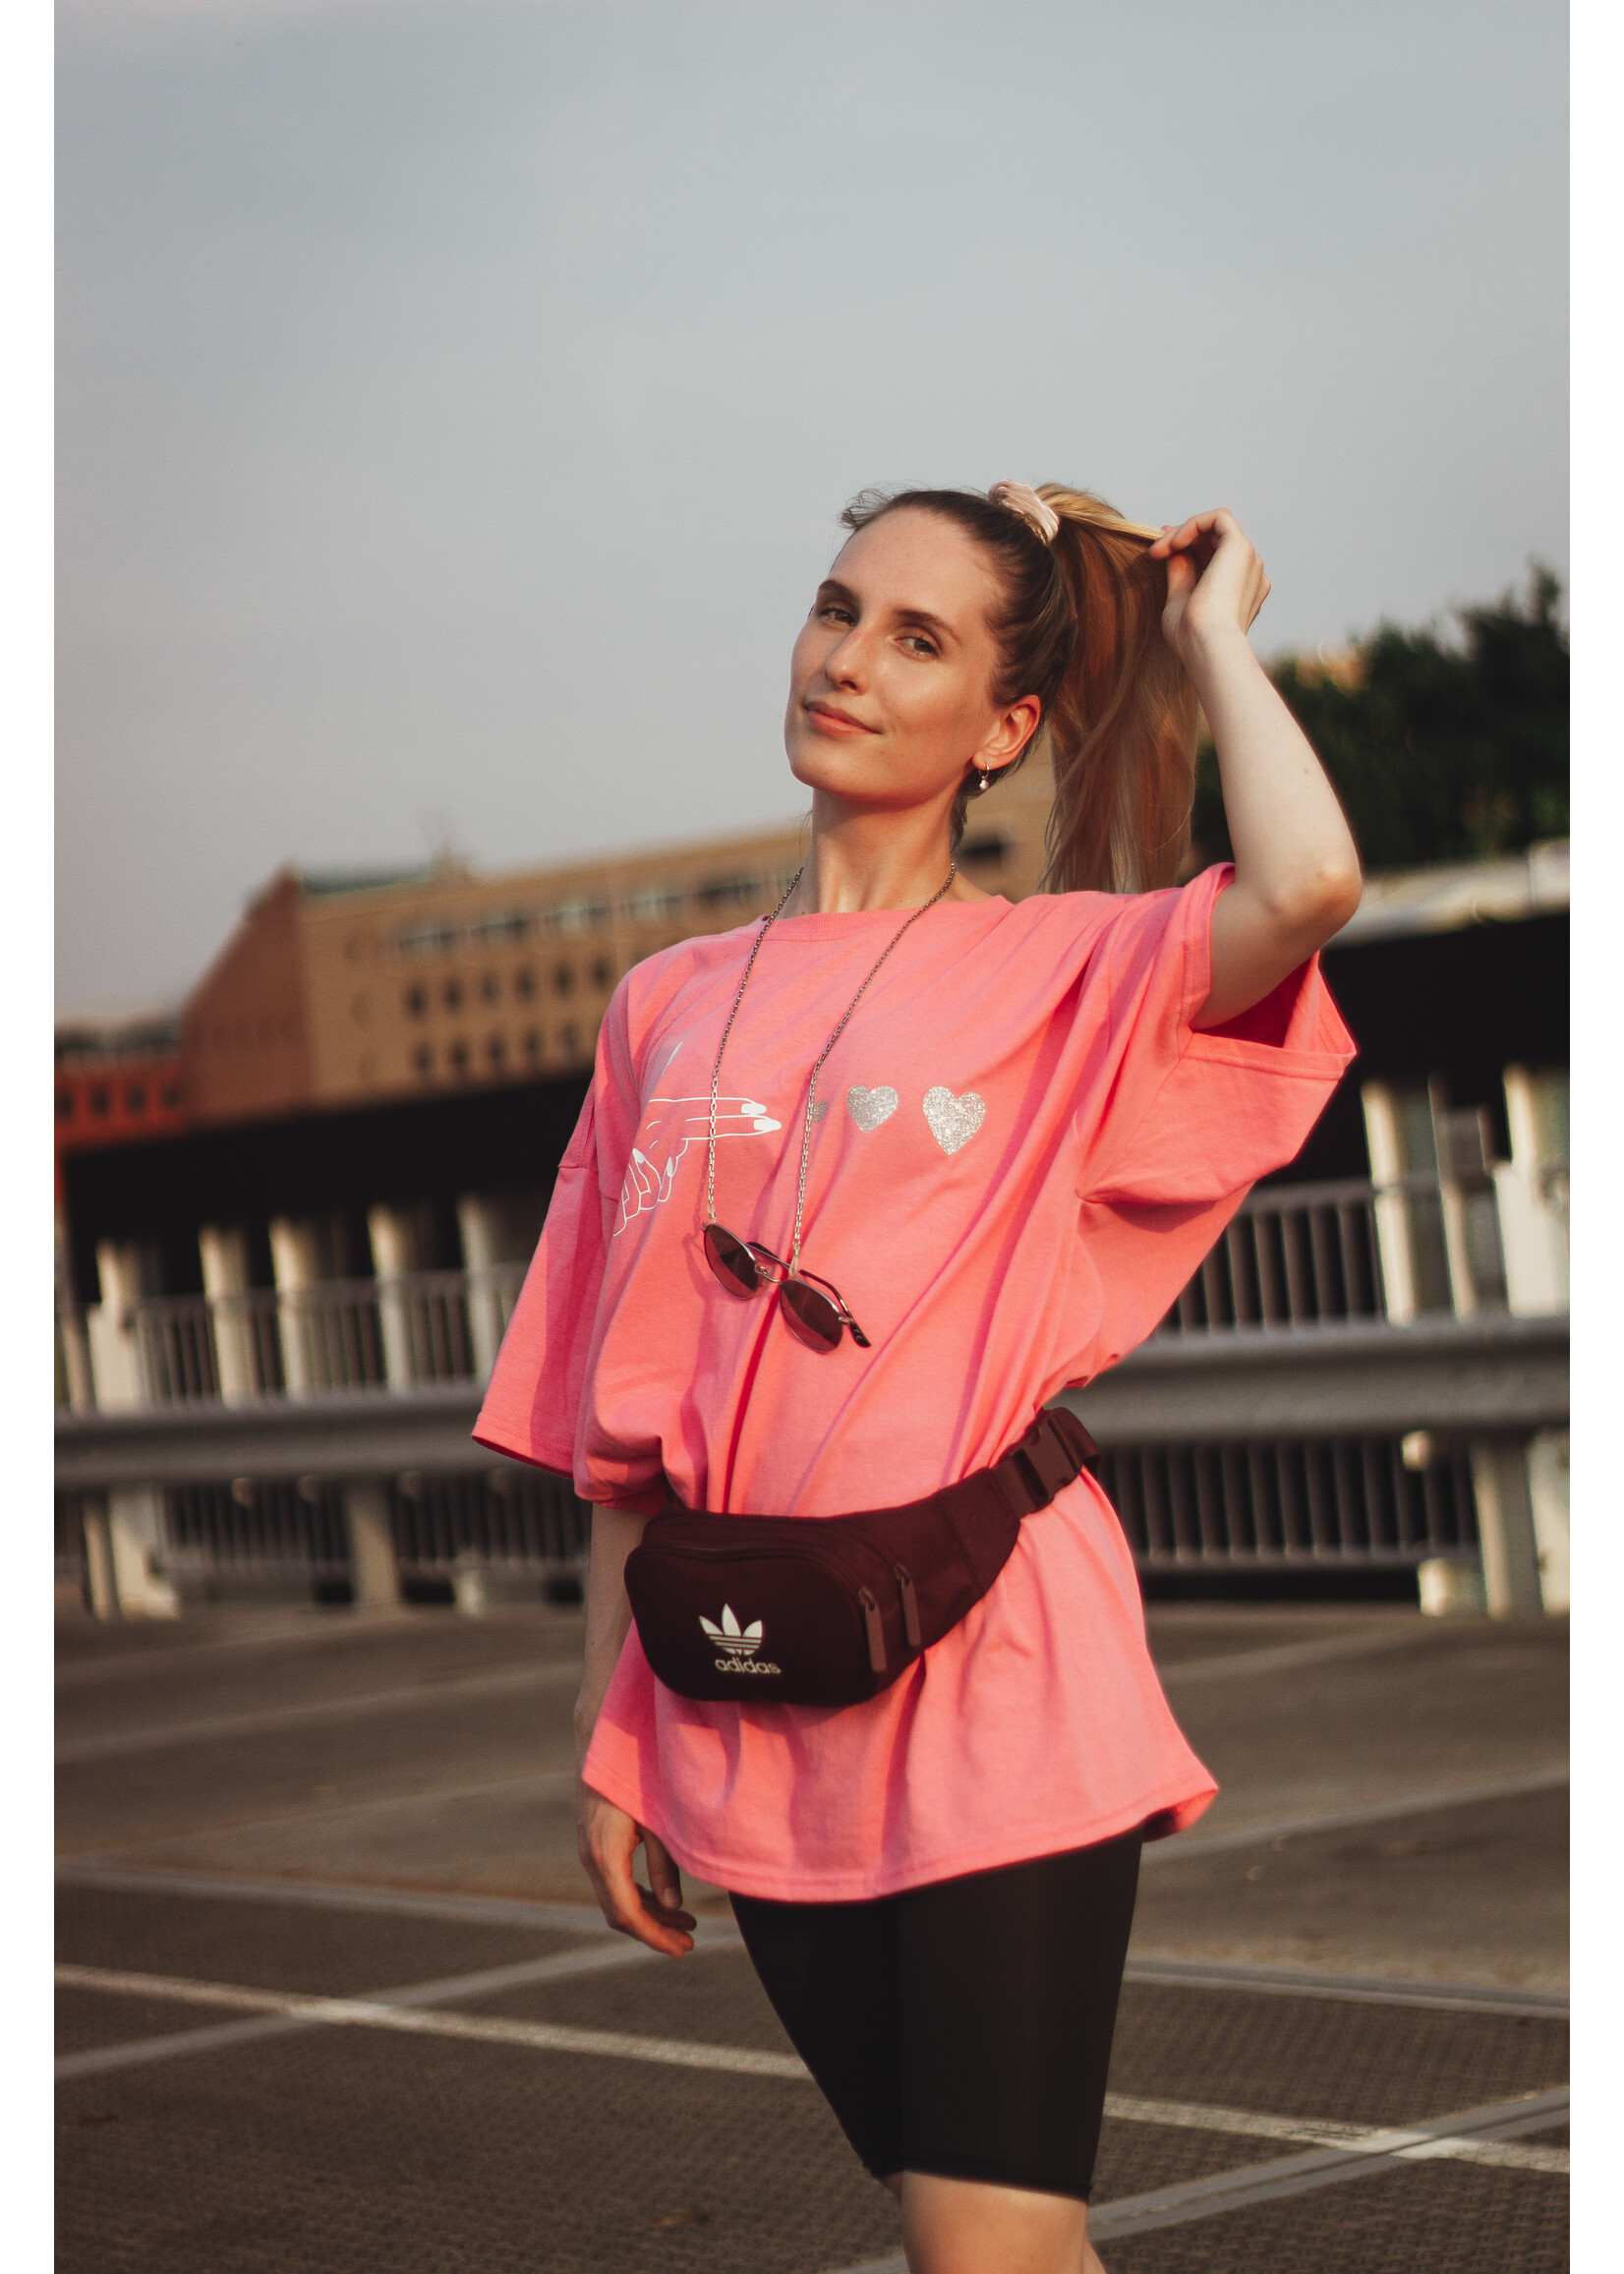 YOU ARE SPECIAL "Spread Love" Pink T-Shirt Dress